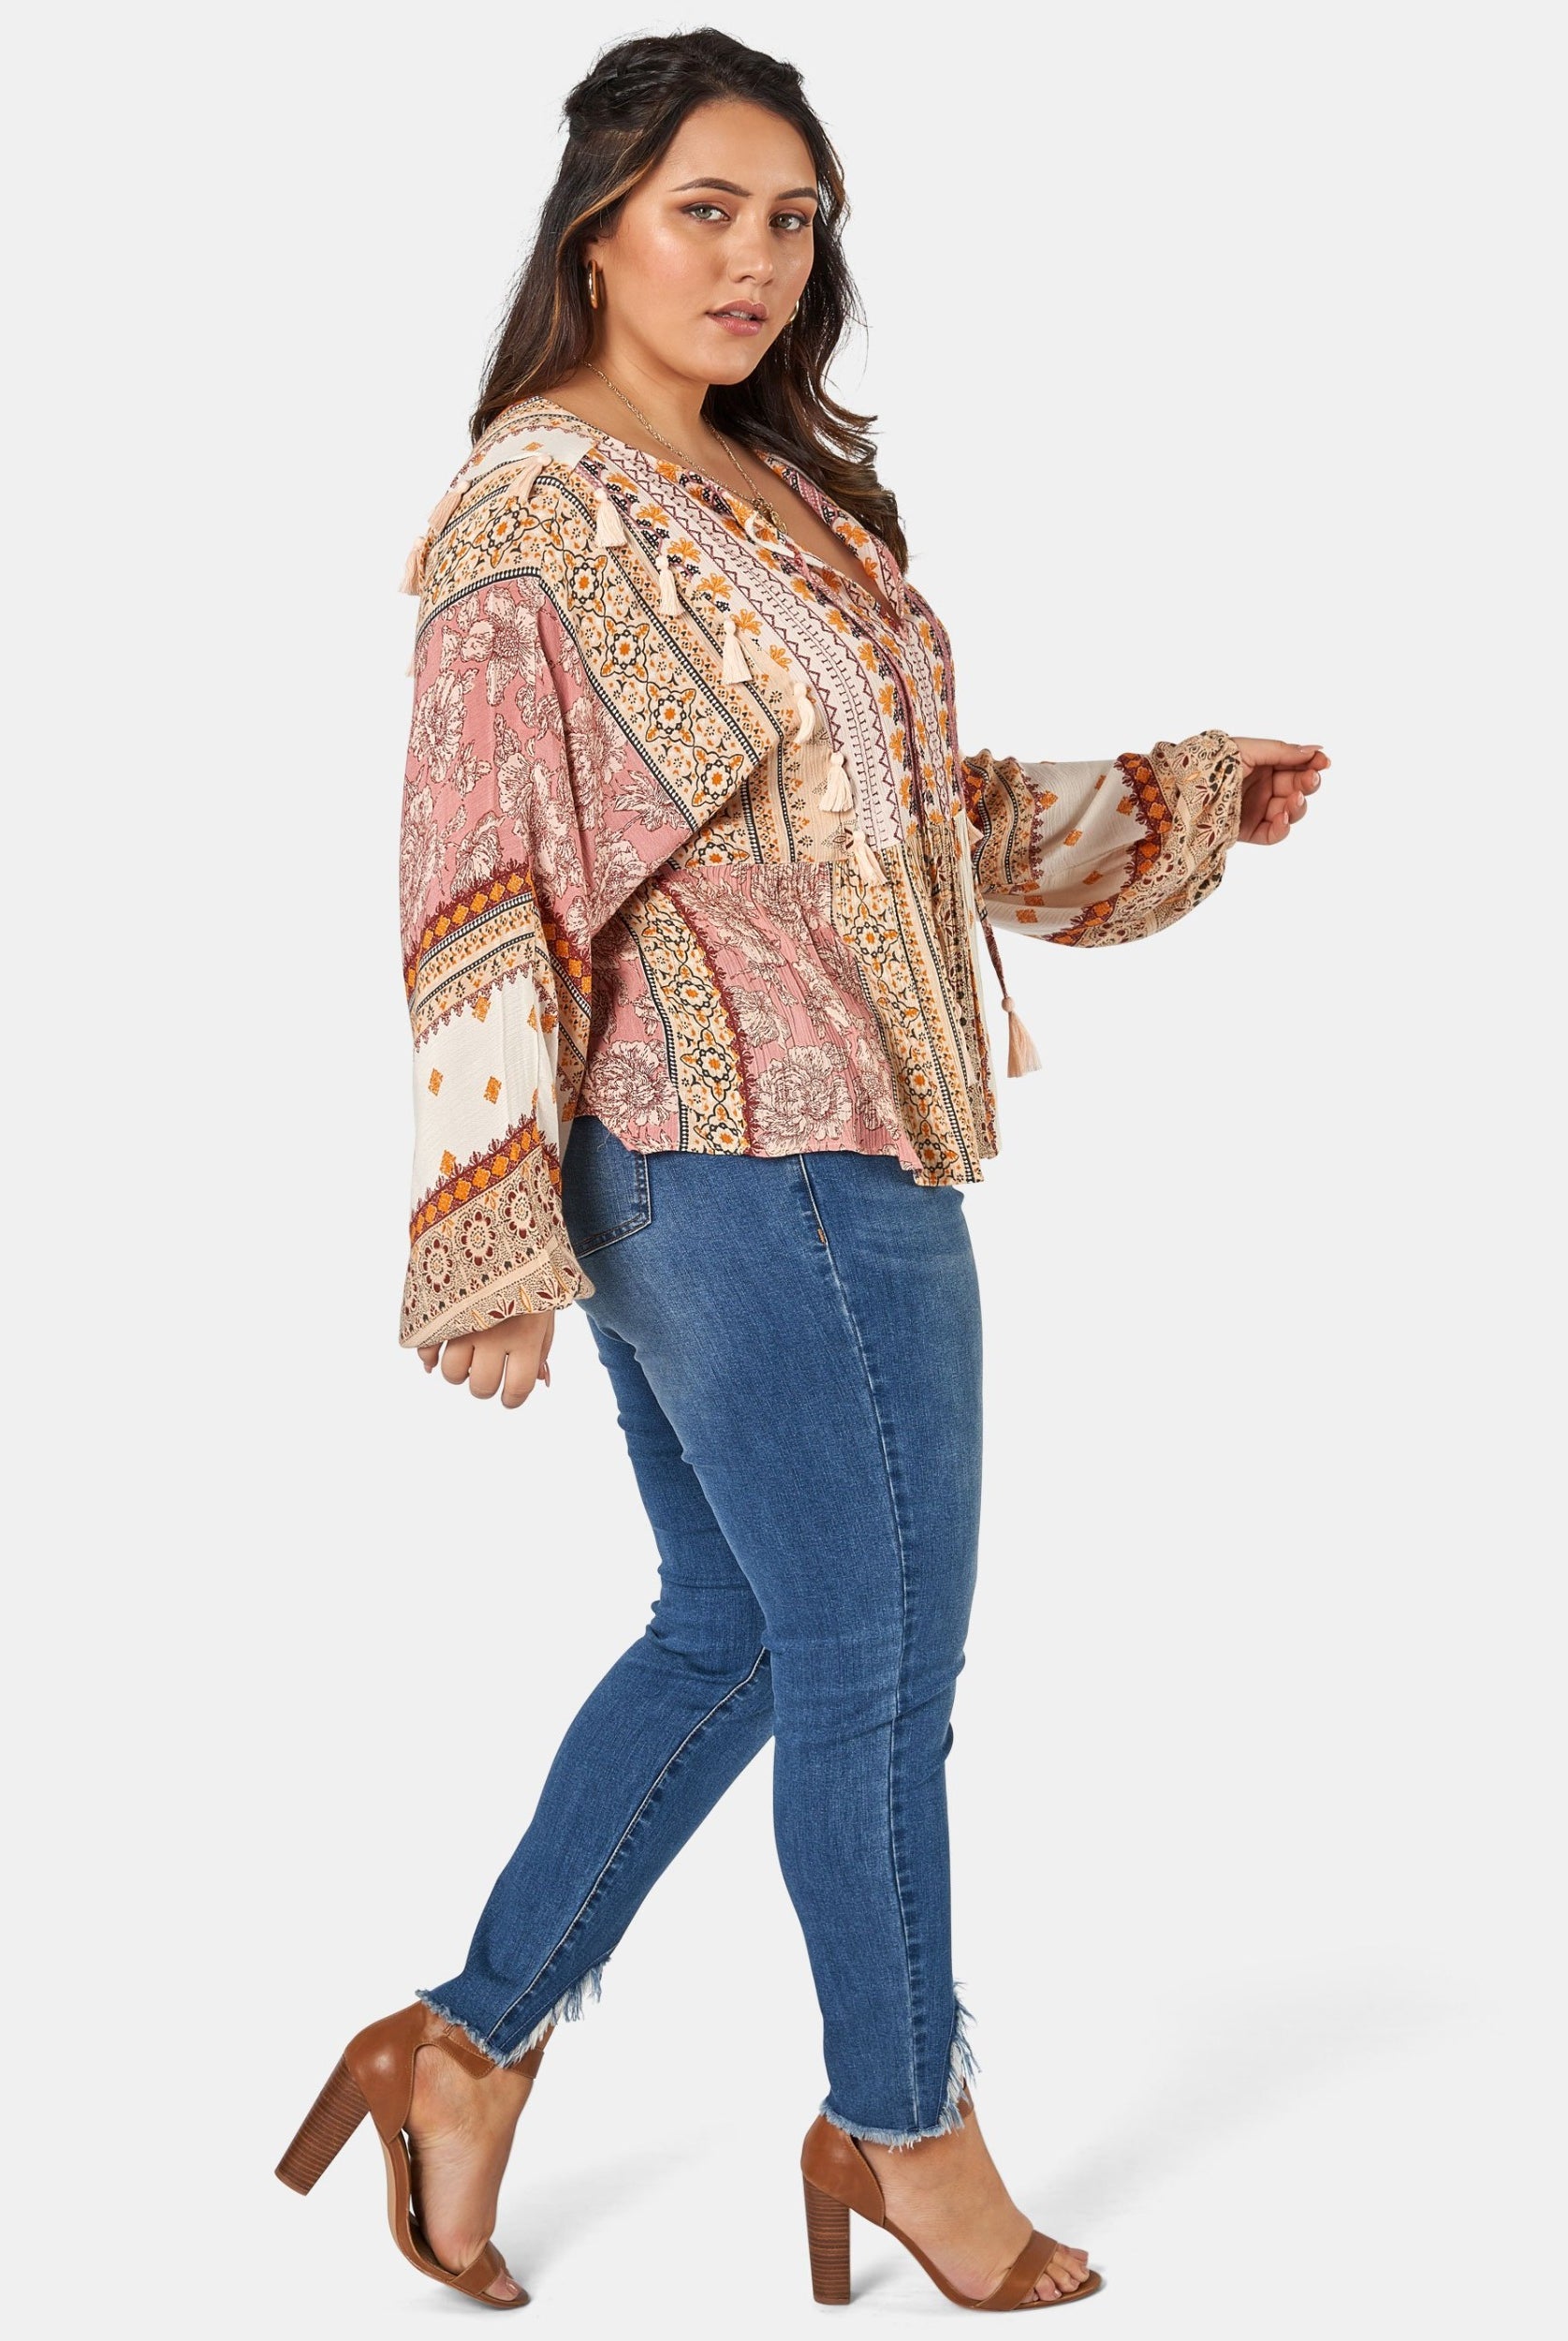 Woman wearing printed boho blouse with jeans